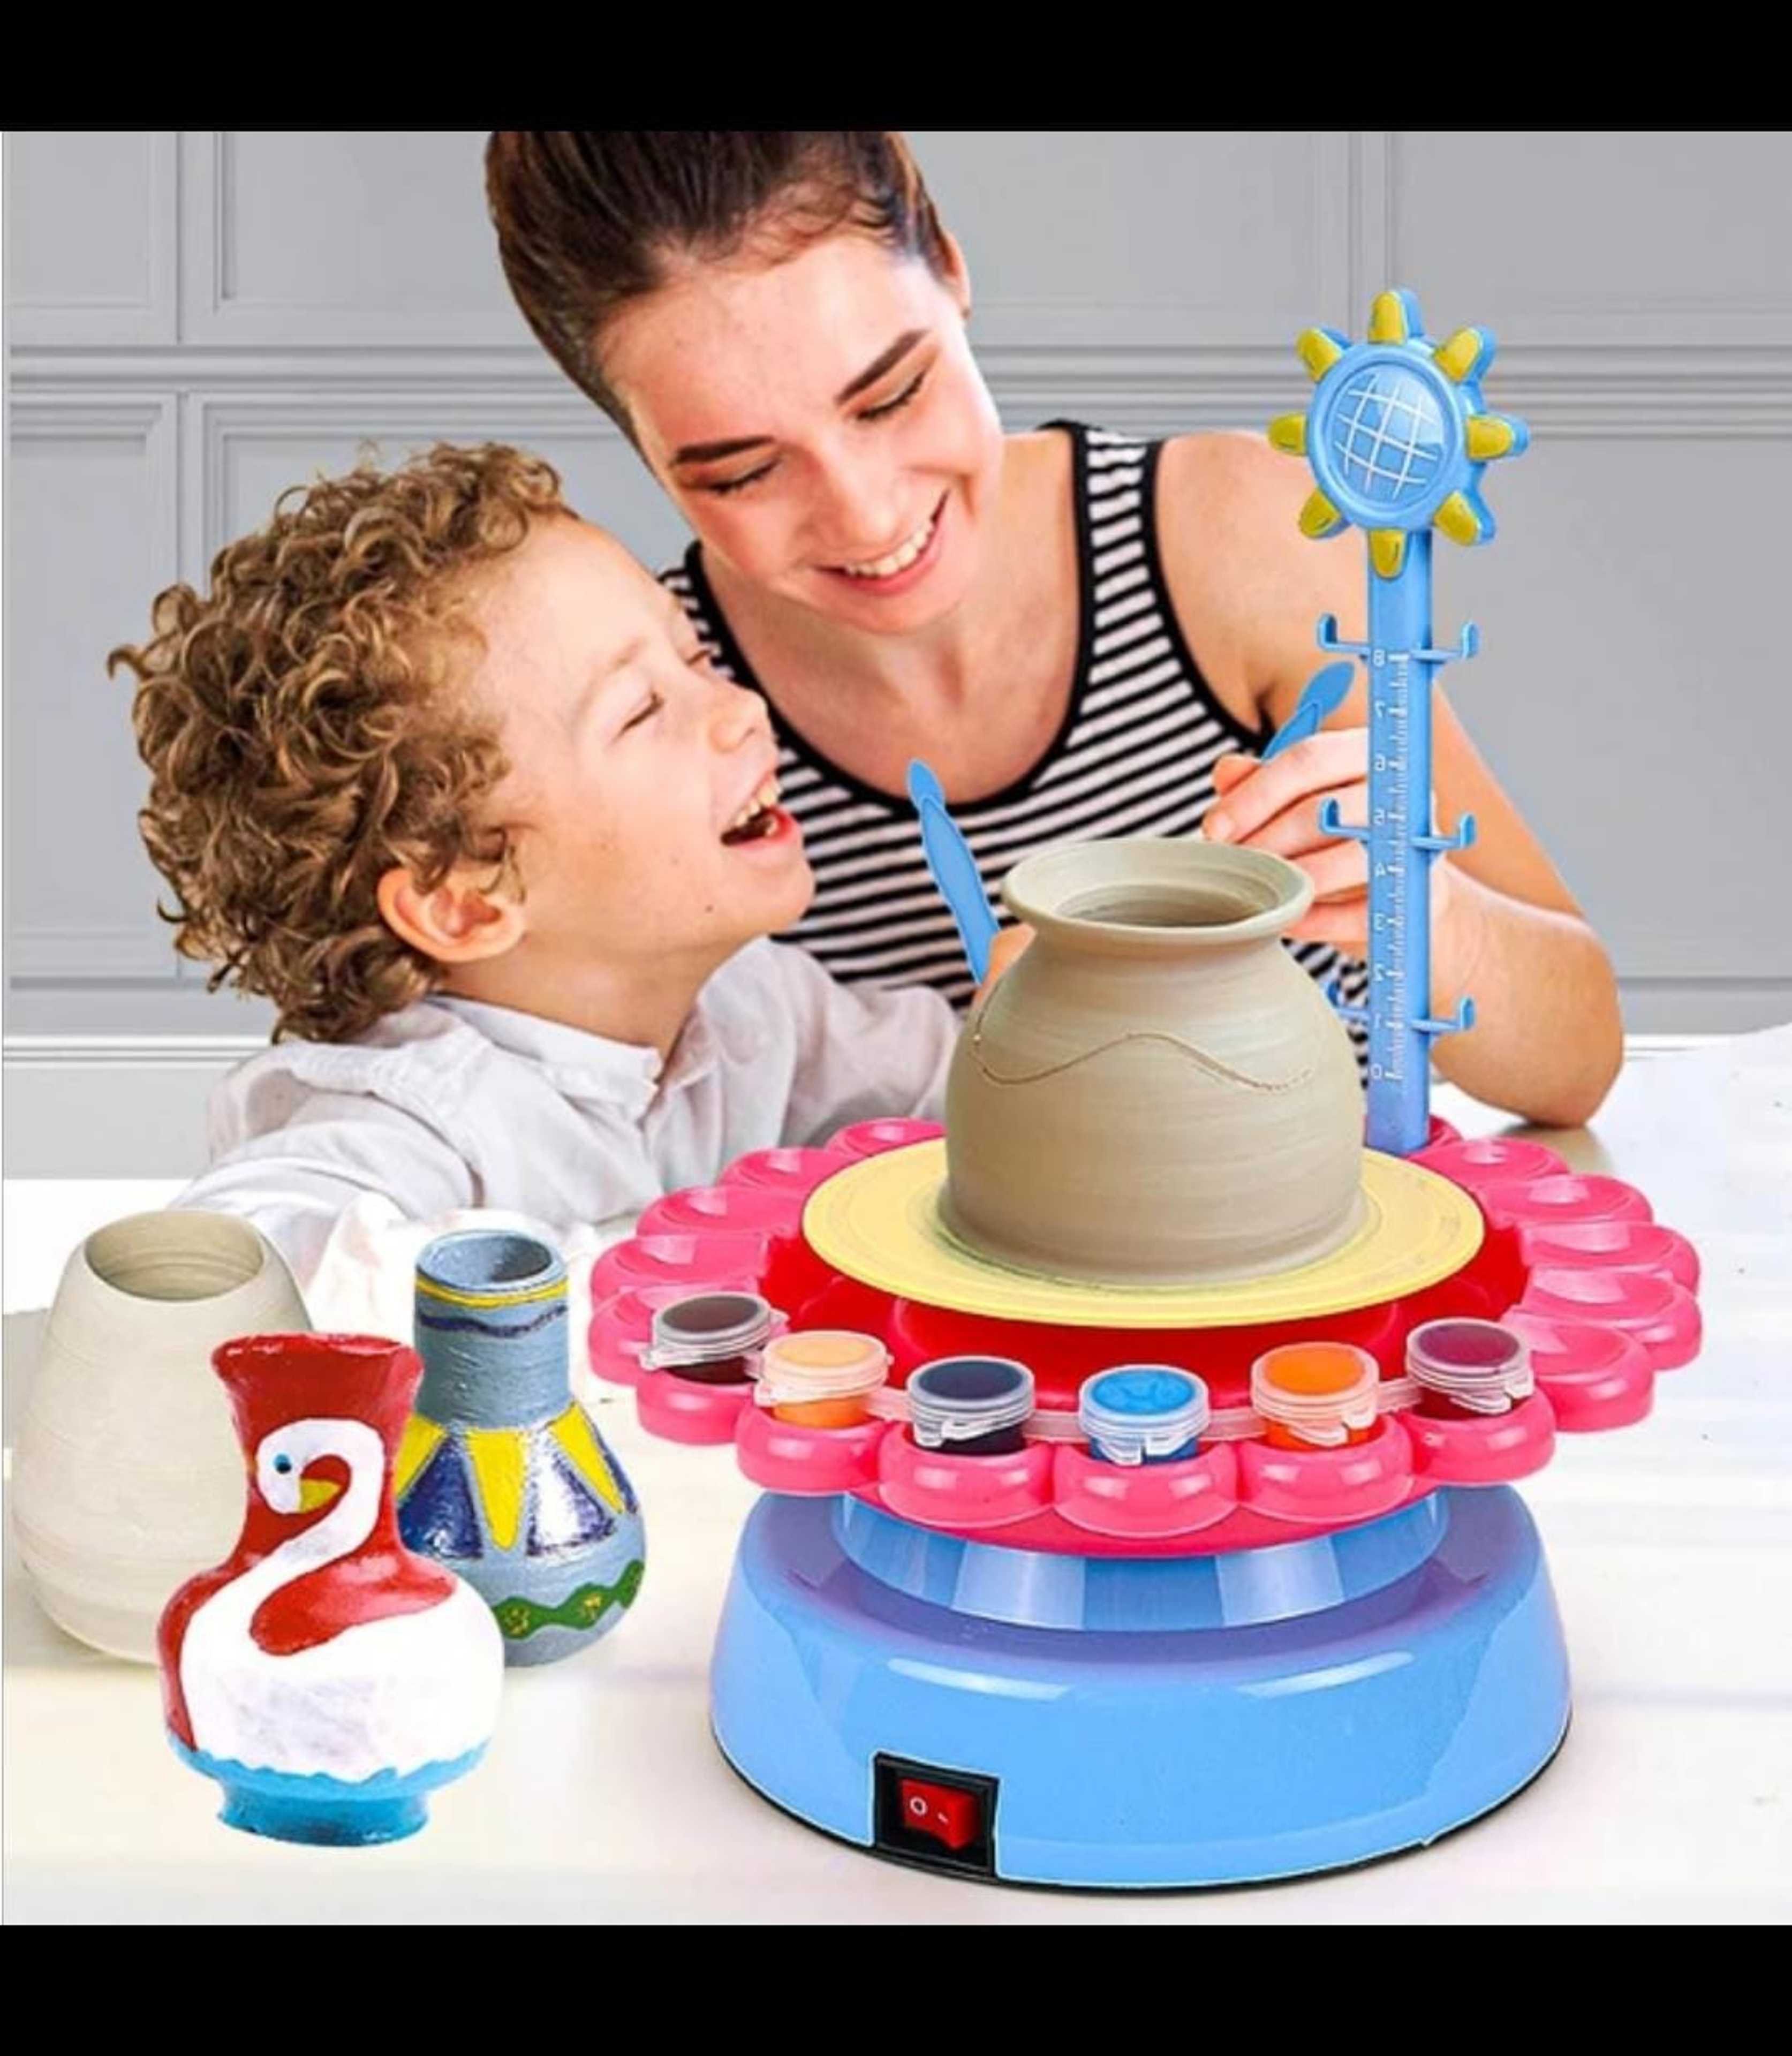 Sunflower Pottery Wheel,Electric Ceramic Wheel Machine DIY Air Dry Sculpting Clay and Craft Paint kit for Kids,Ceramic Machine with Air-Dry Clay